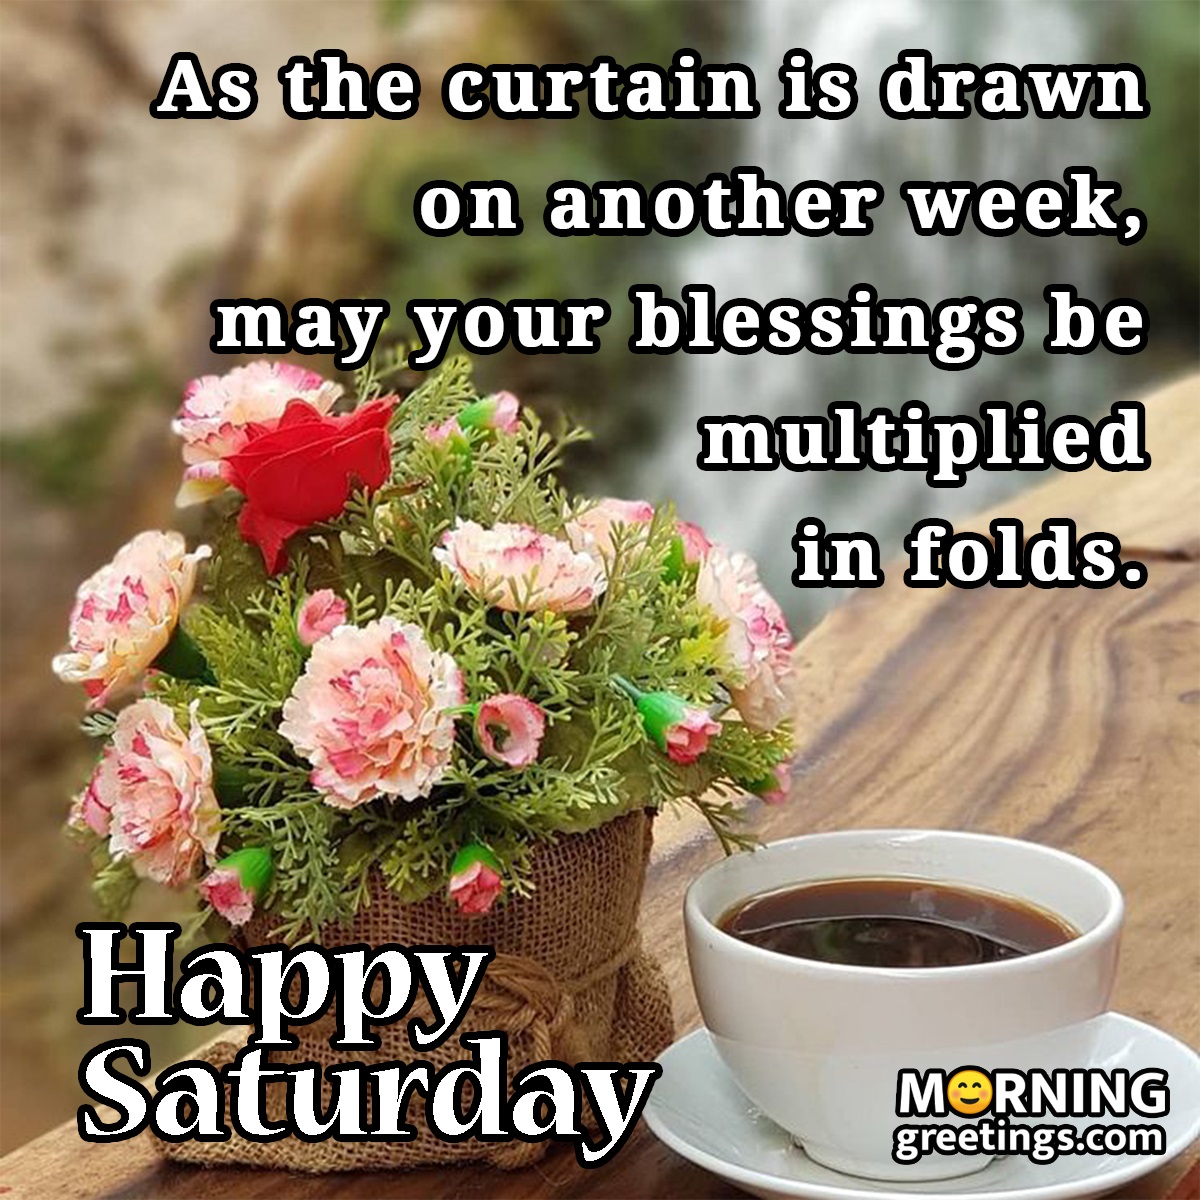 Happy Saturday Blessing